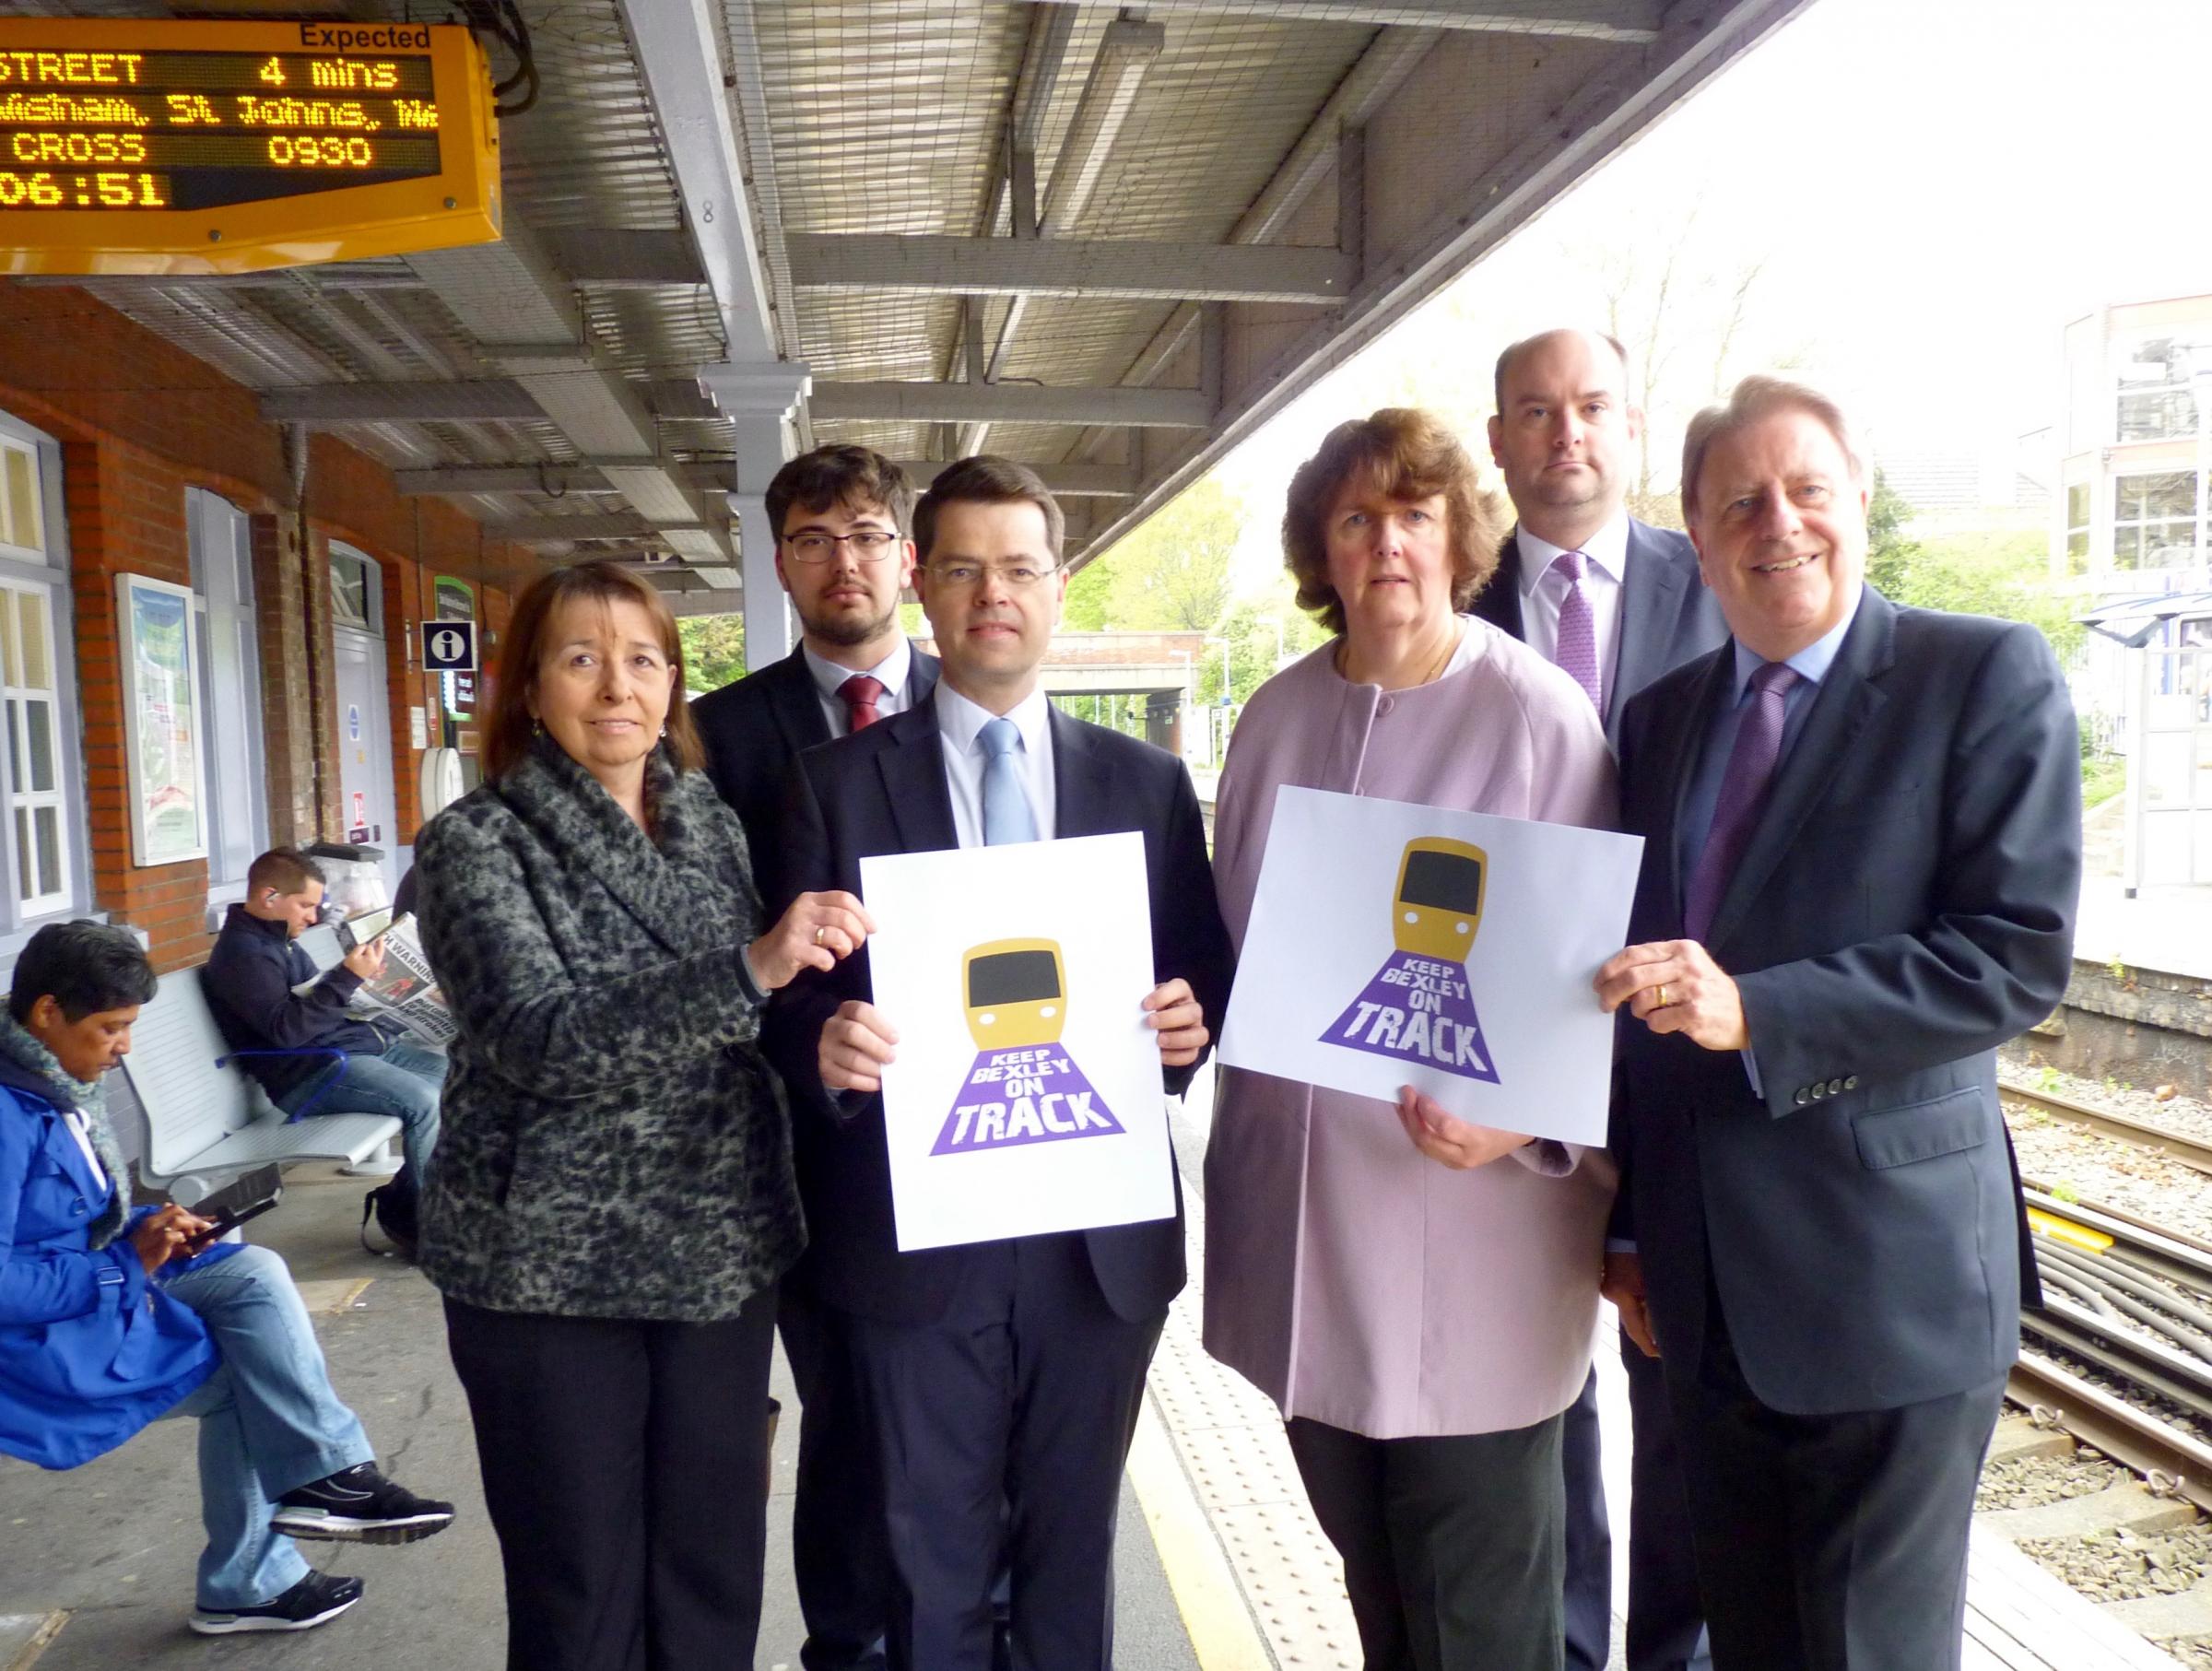 MPs continue to back train petition as signatures hit 20,000